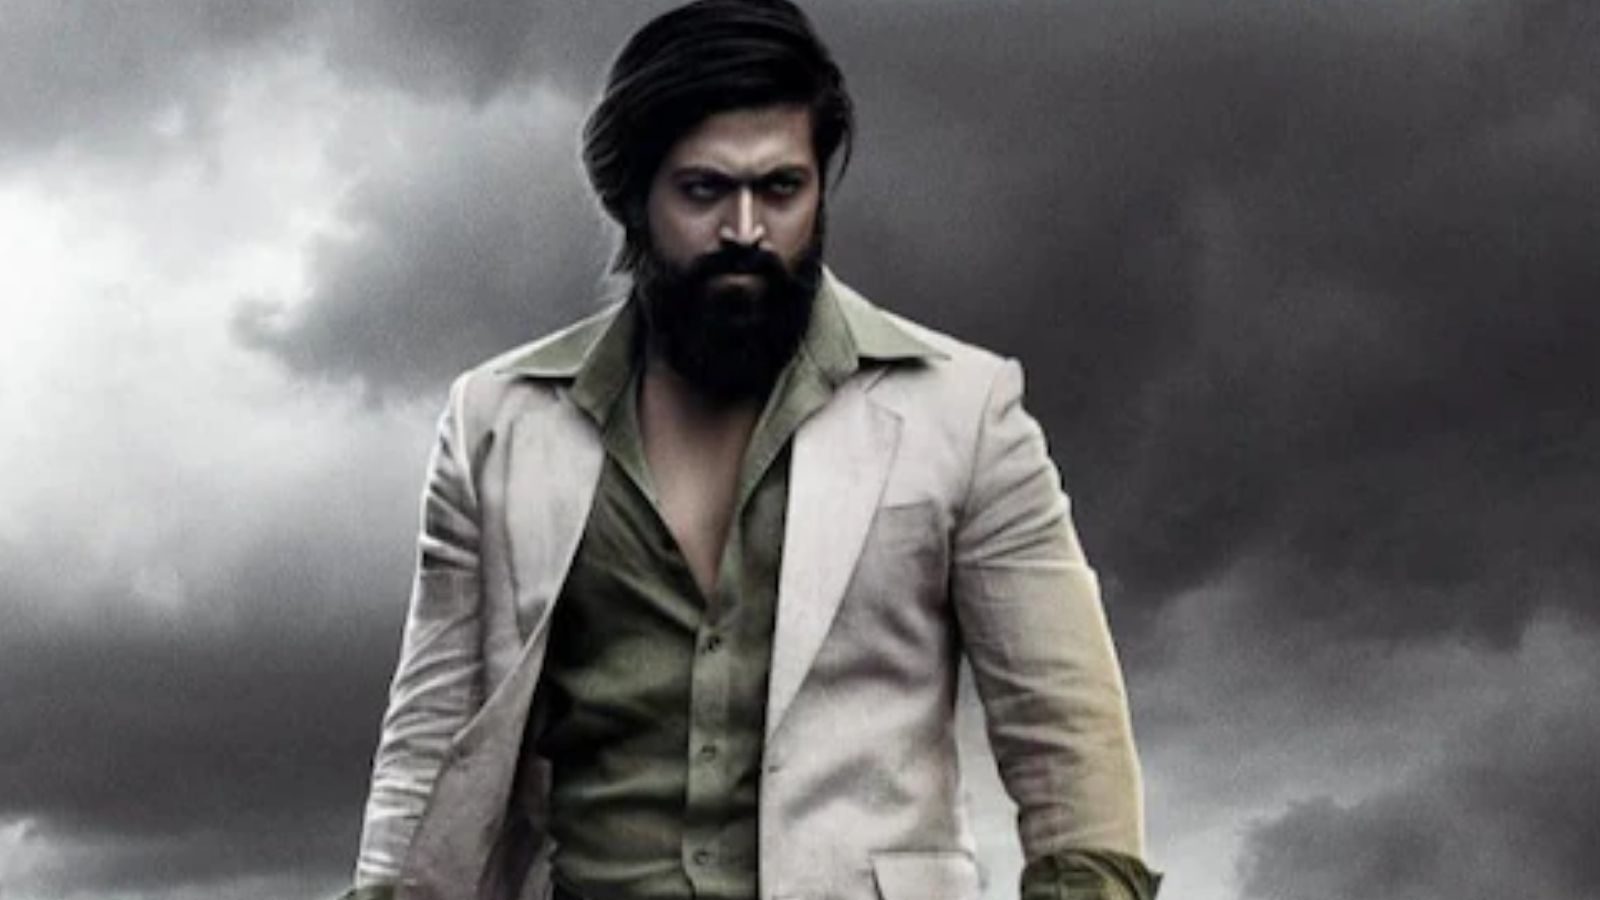 KGF Chapter 2' Box Office Collection: KGF 2 beats 'Bahubali 2', earns 200  crores in Hindi in 5 days